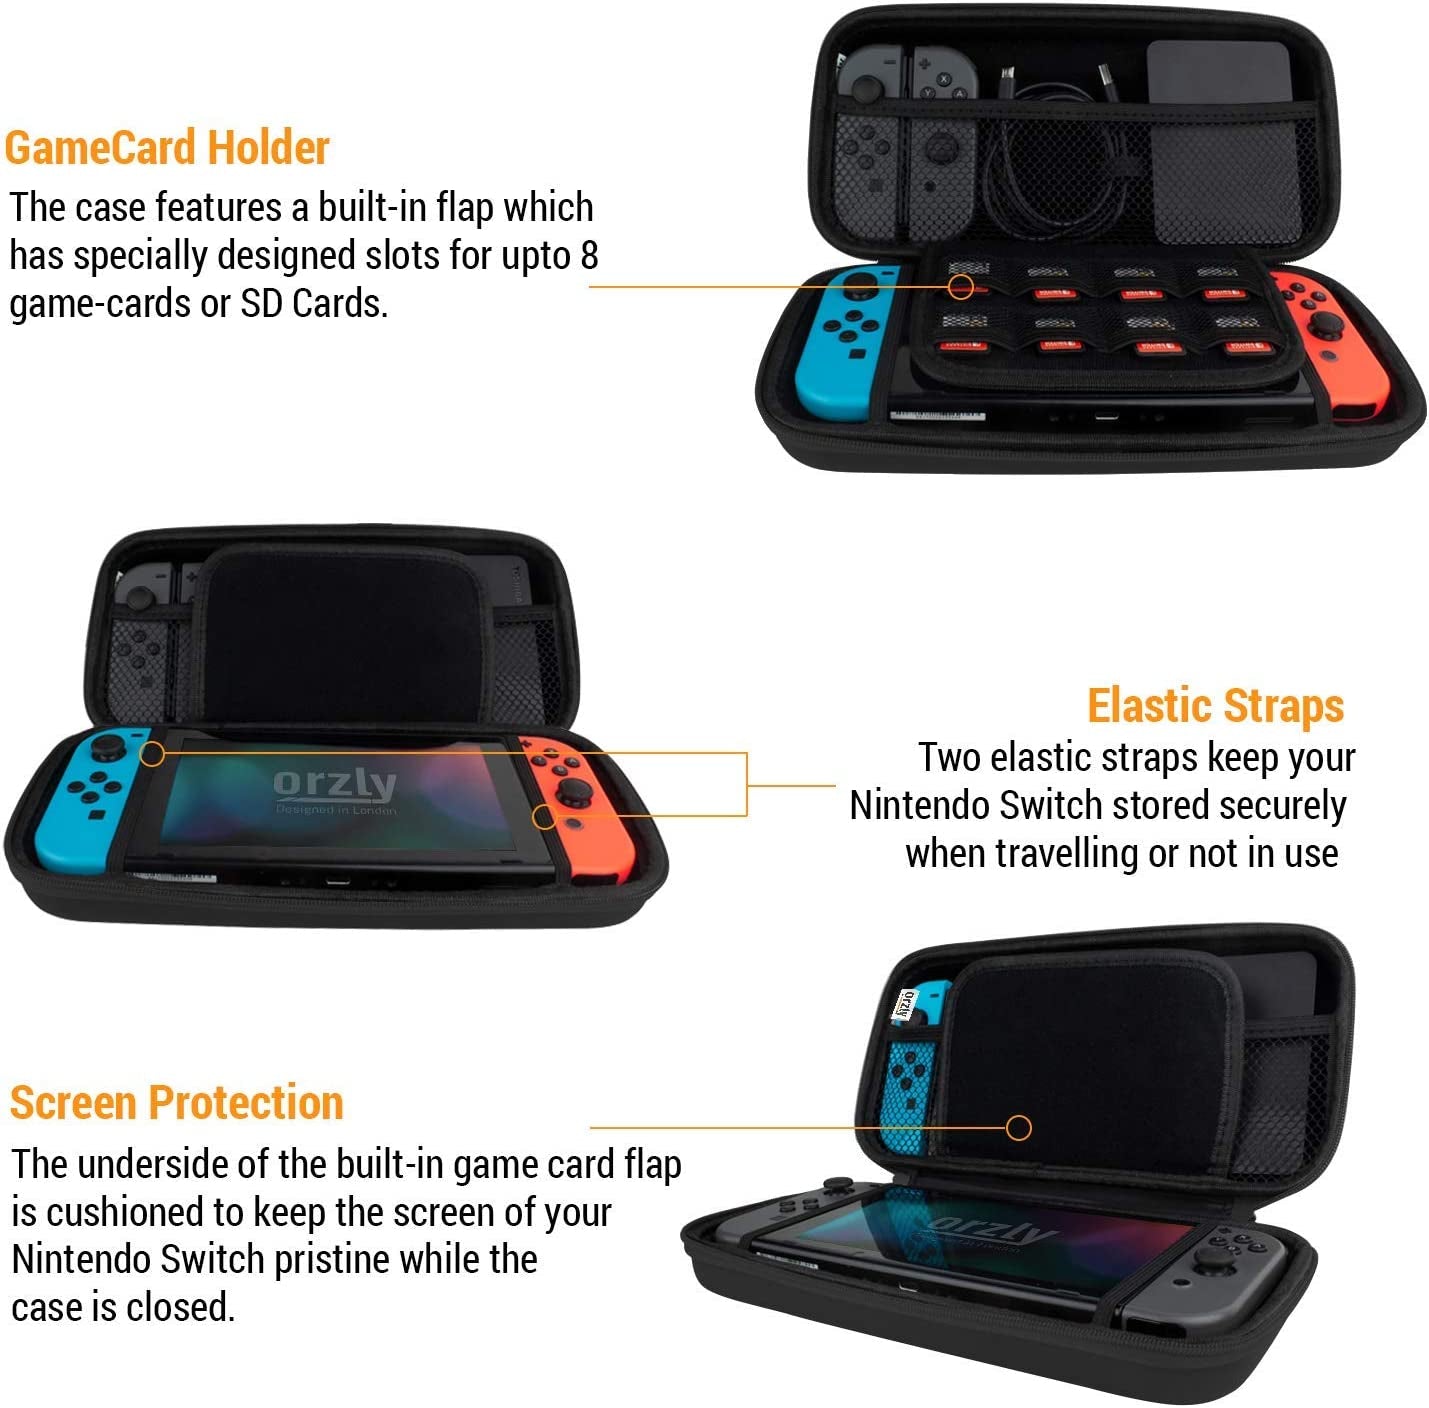 Protective Travel Carry Case for Nintendo Switch and New Switch OLED Console - Black Hard Shell with Pockets for Accessories and Games